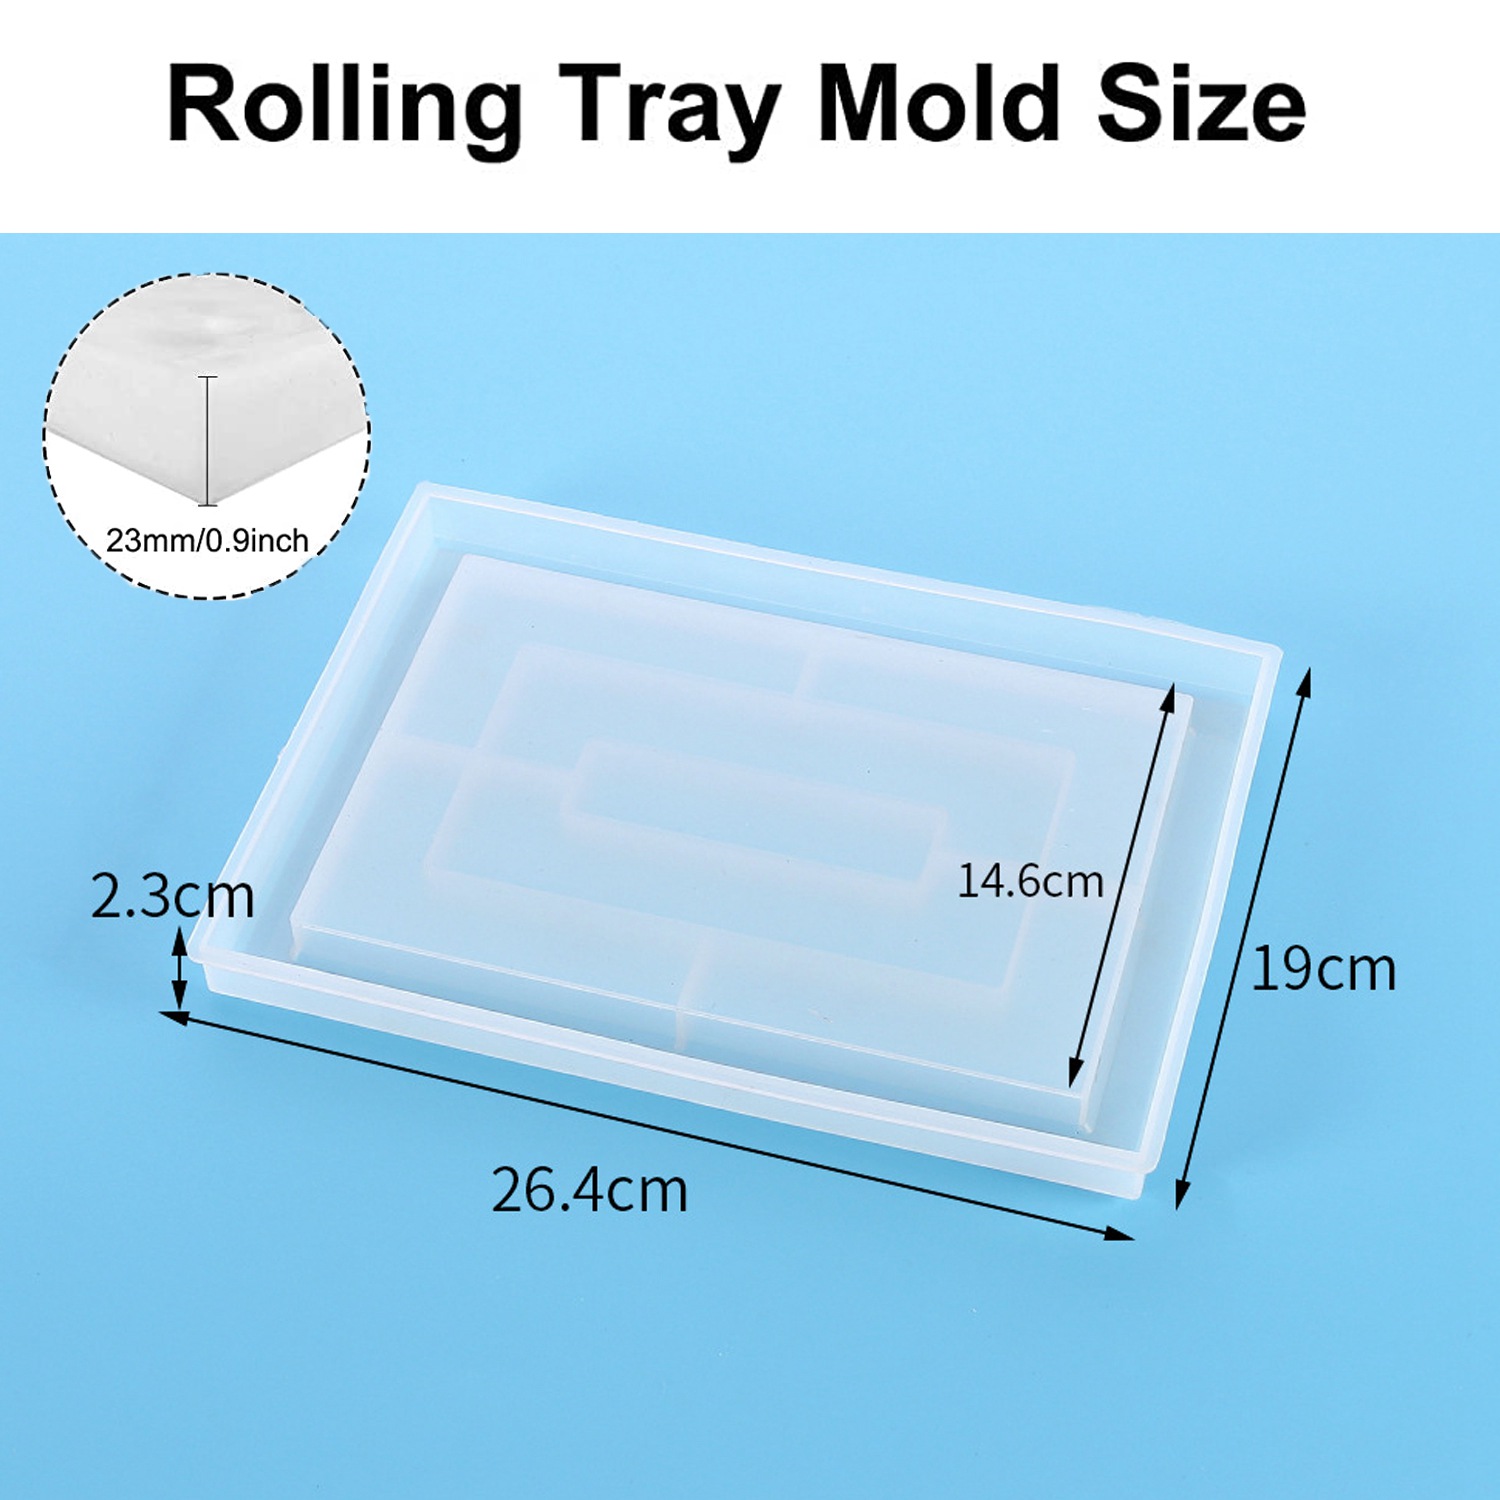 Growment Resin Mold Silicone, Large Rectangle Rolling Tray Molds for Epoxy Resin, Resin Serving Board Mold with Edges, Size: 26.4, Blue